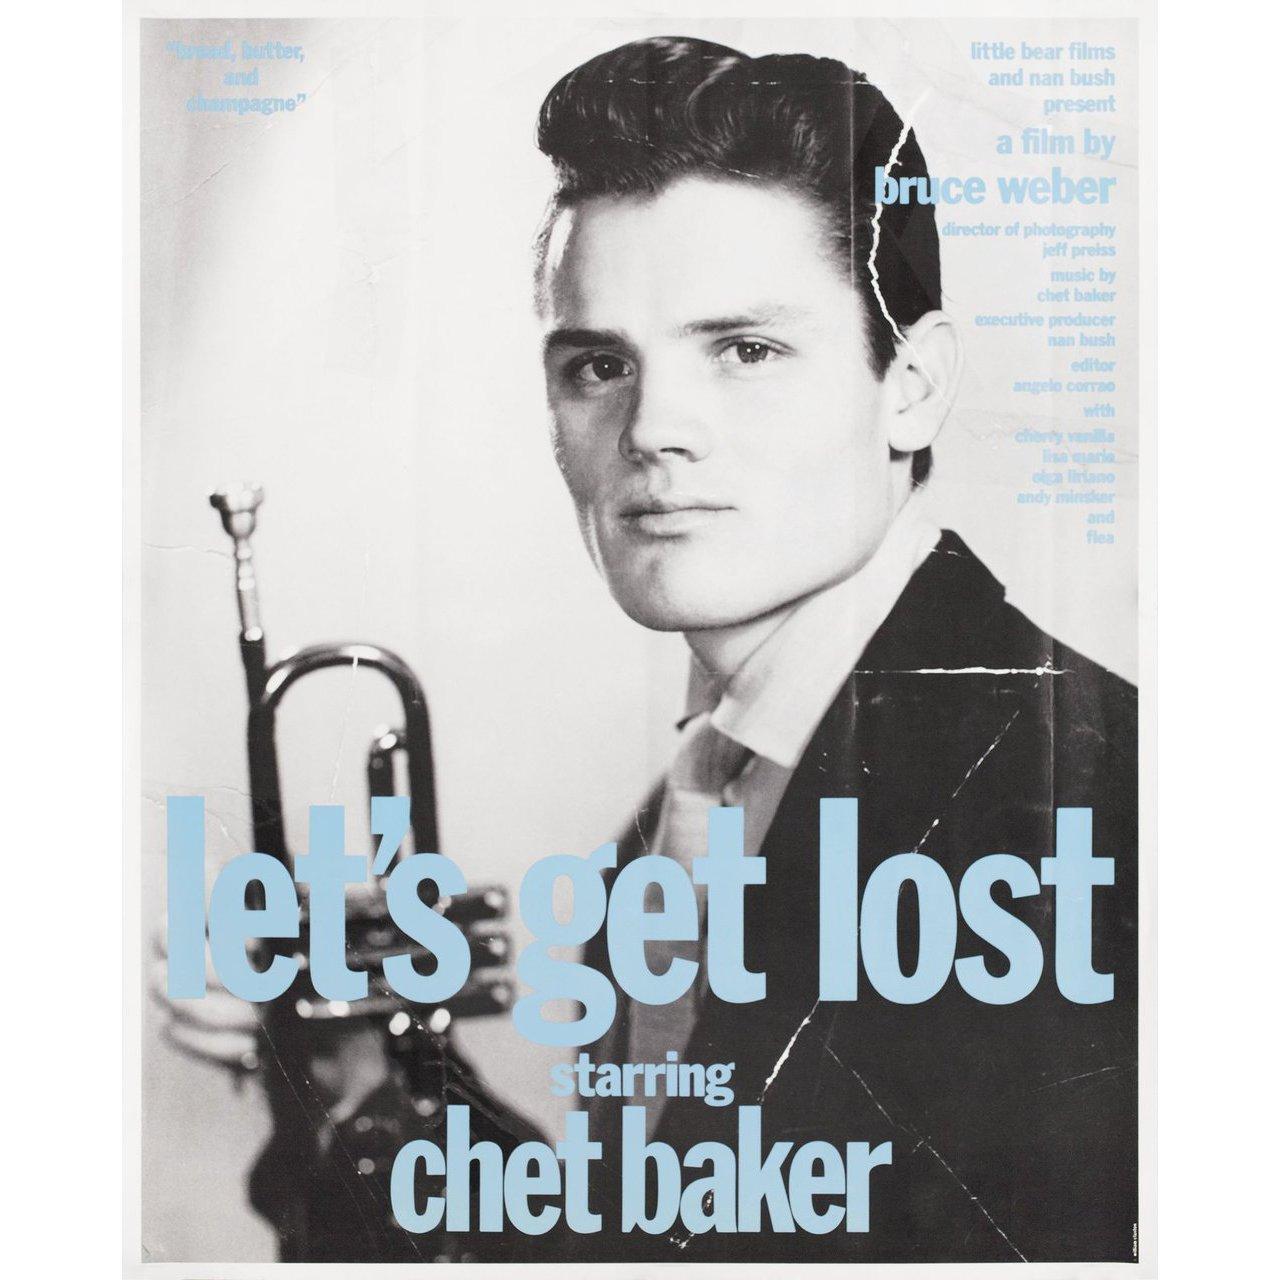 Original 1989 U.S. mini poster by William Claxton for the documentary film “Let's Get Lost” directed by Bruce Weber with Chet Baker / Carol Baker / Vera Baker / Paul Baker. Very good fine condition, rolled. Please note: the size is stated in inches